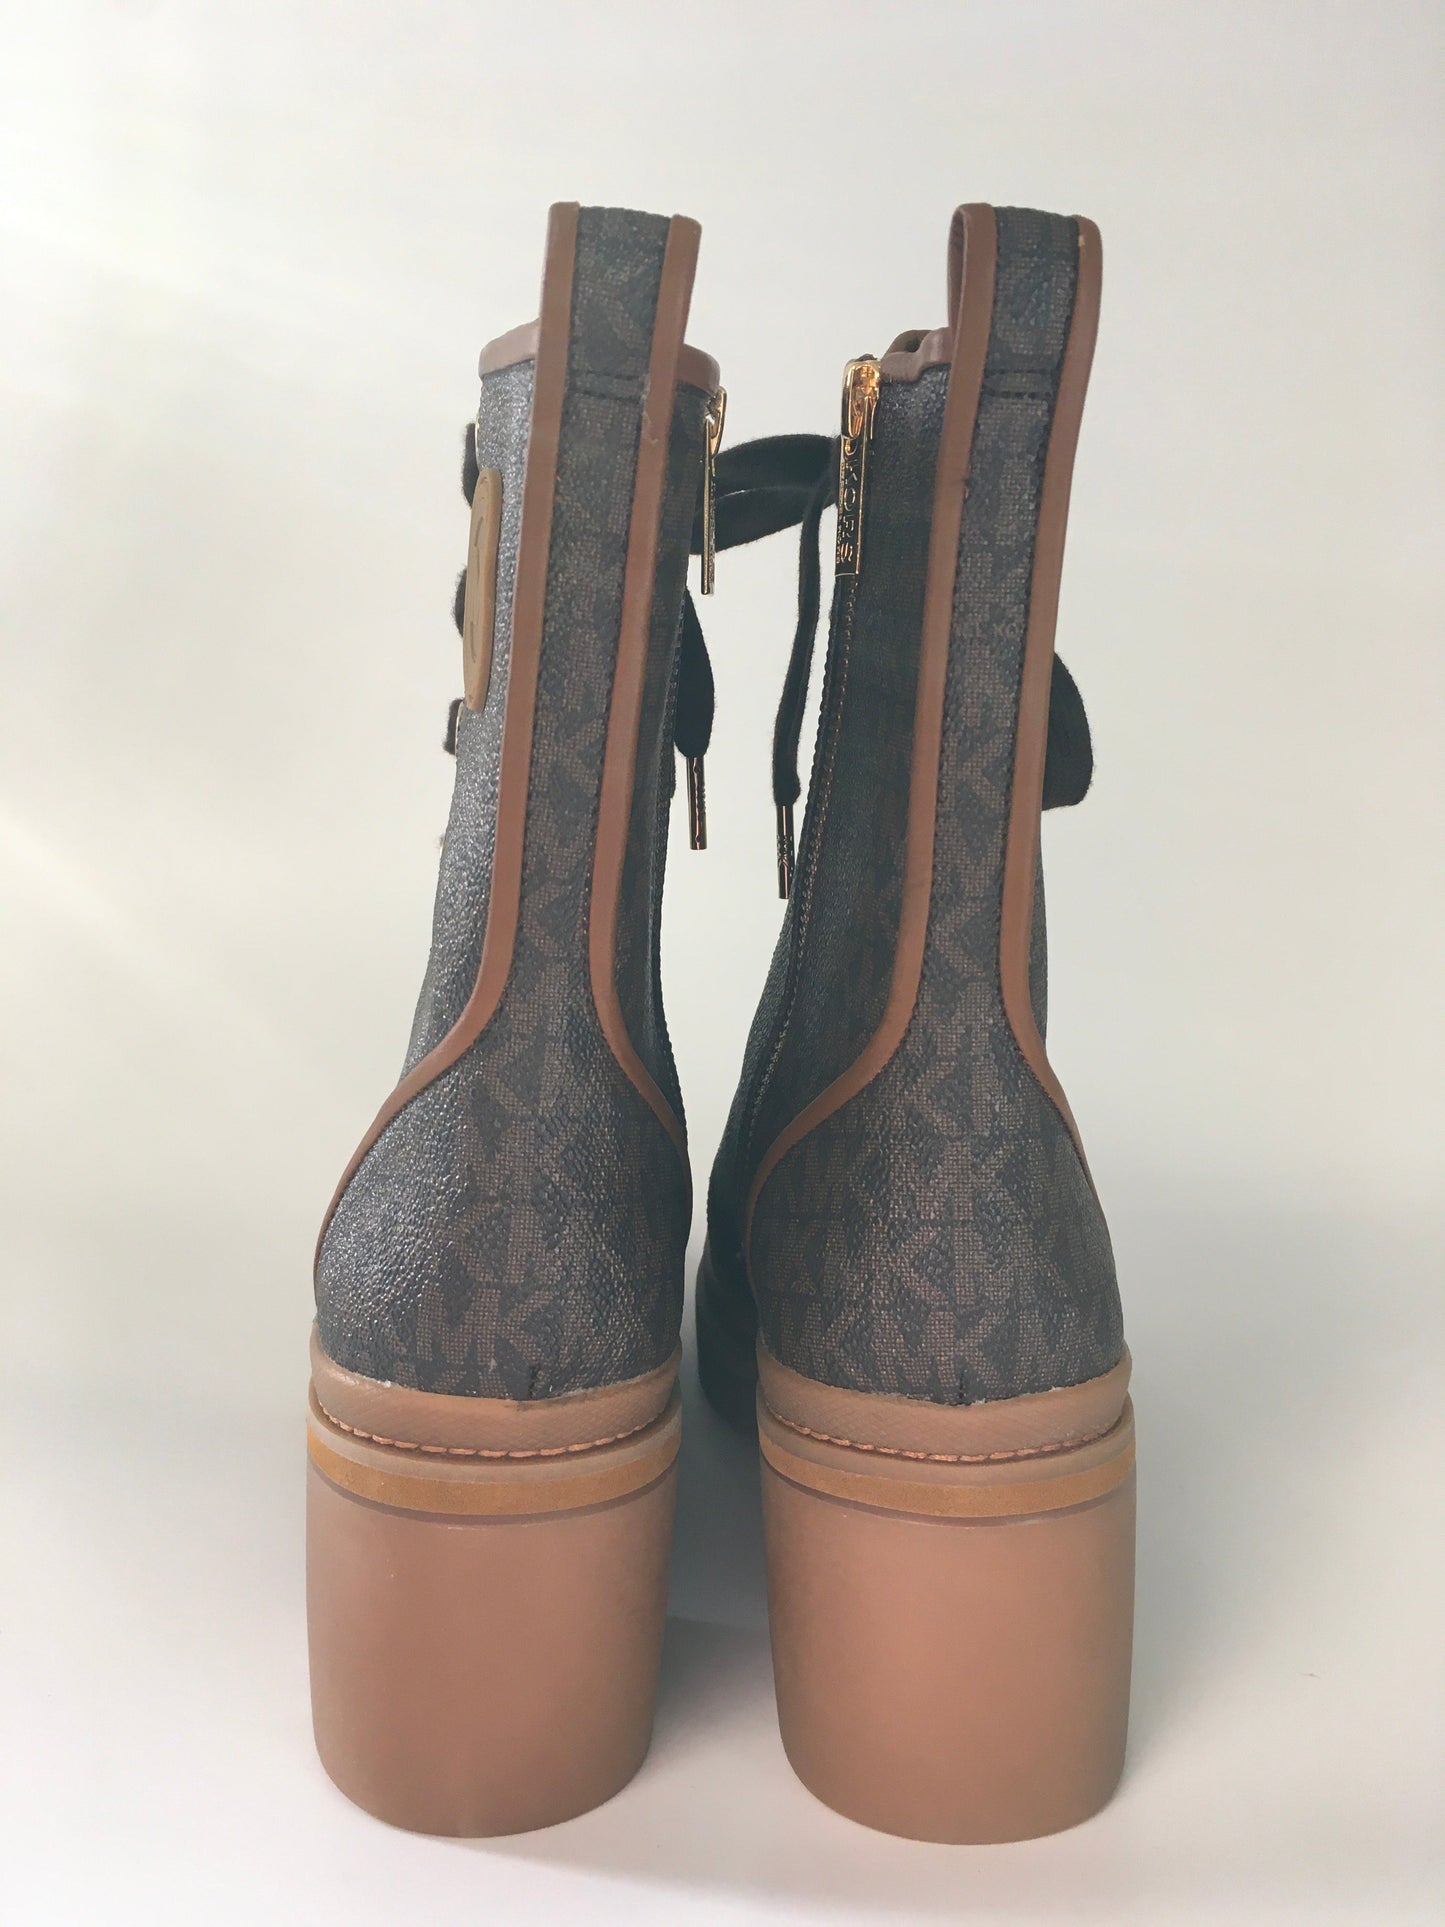 Boots Ankle Heels By Michael Kors  Size: 7.5